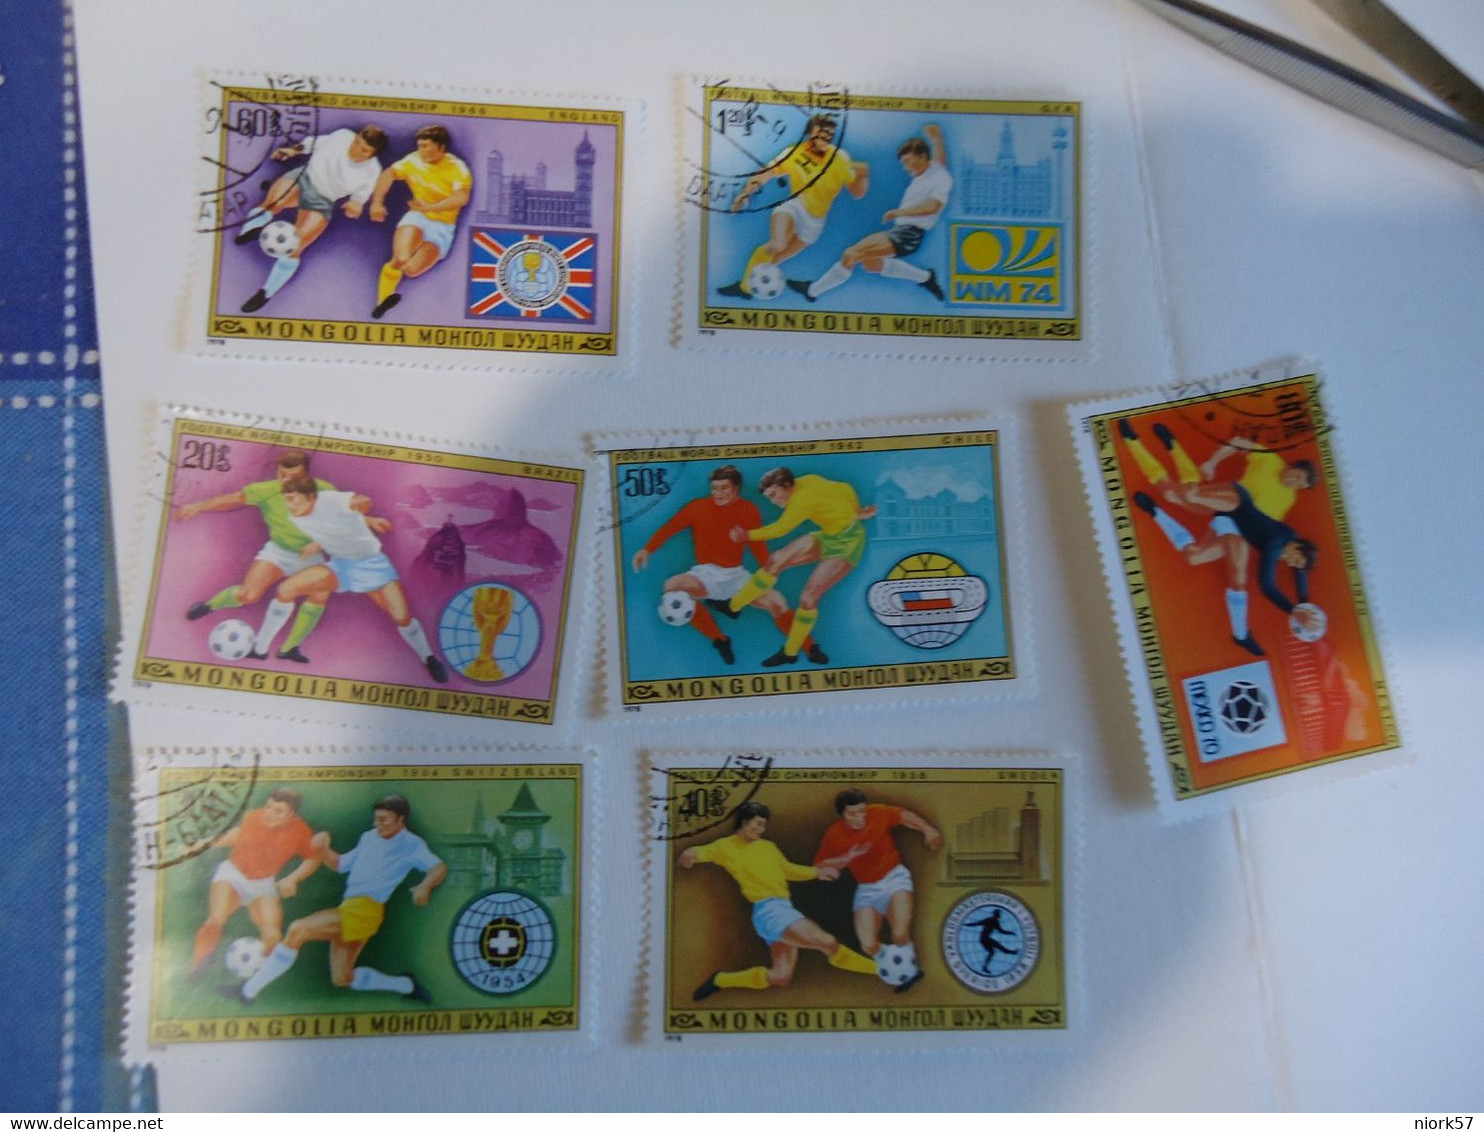 MONGOLIA USED 7 STAMPS  FOOTBALL WORLD CUP SWITZERLAND 1954 - 1954 – Suisse